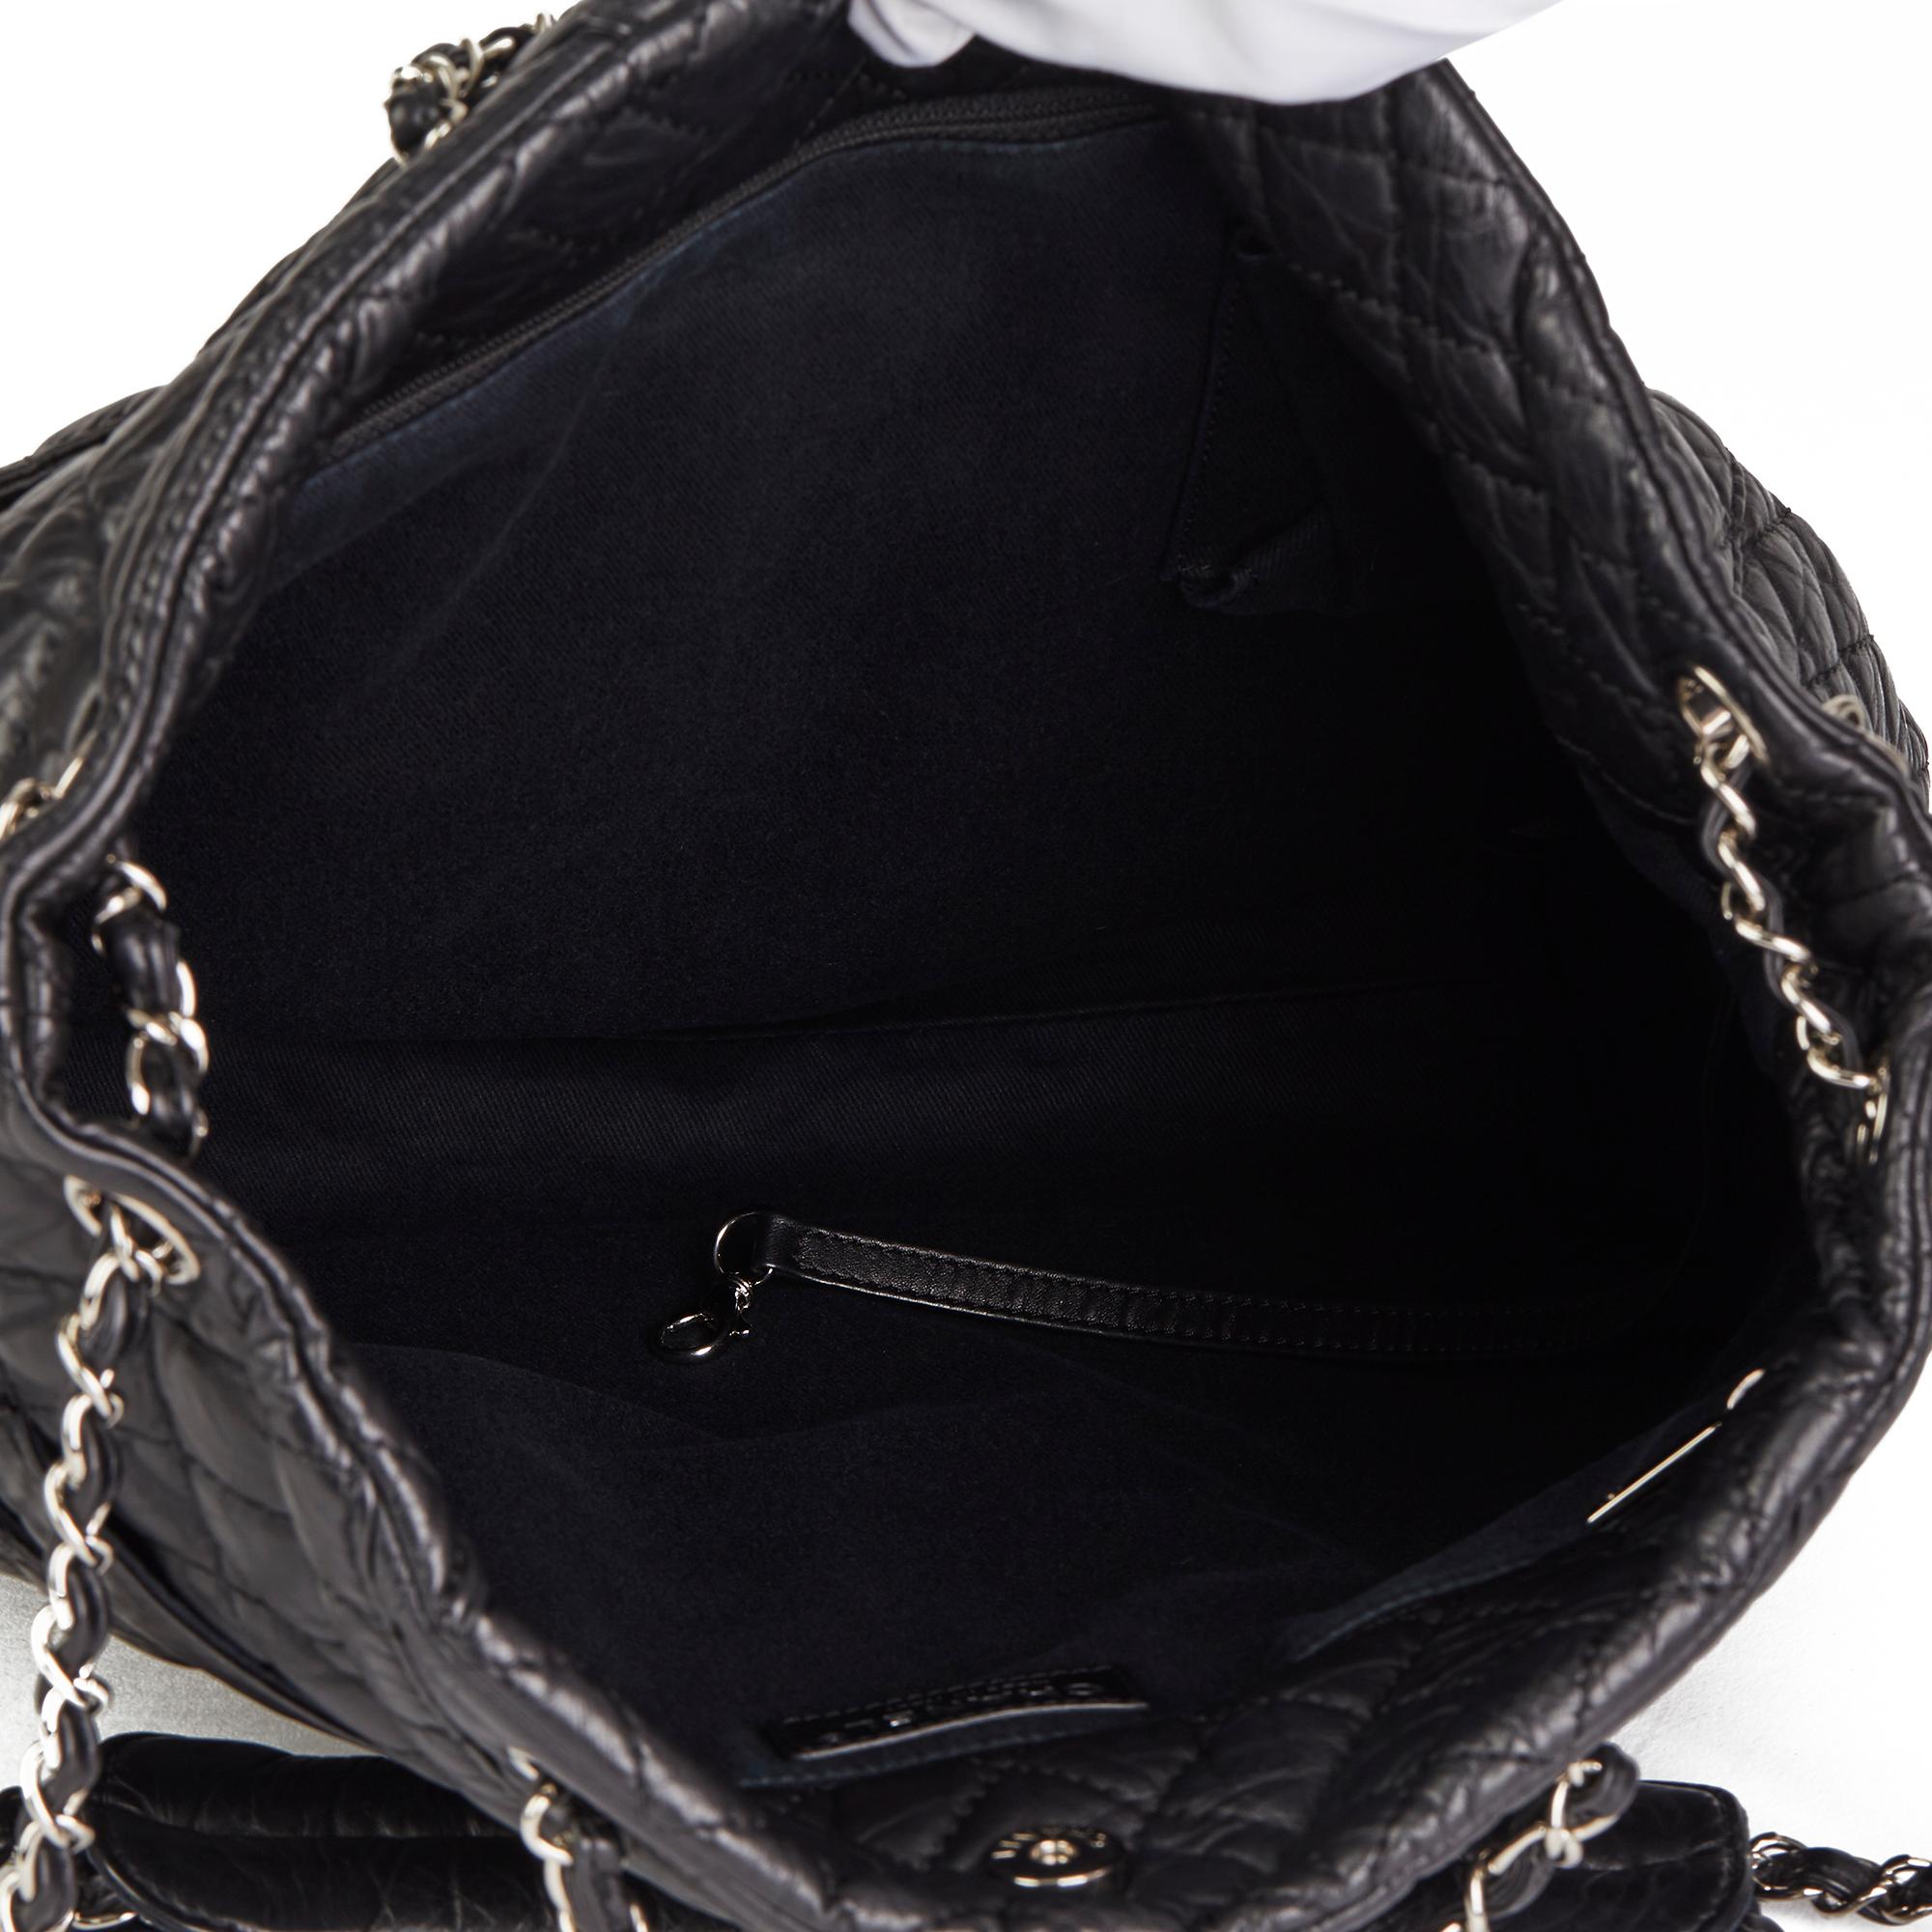 2010 Chanel Black Quilted Aged Calfskin Leather Fantasy Shopping Tote 7